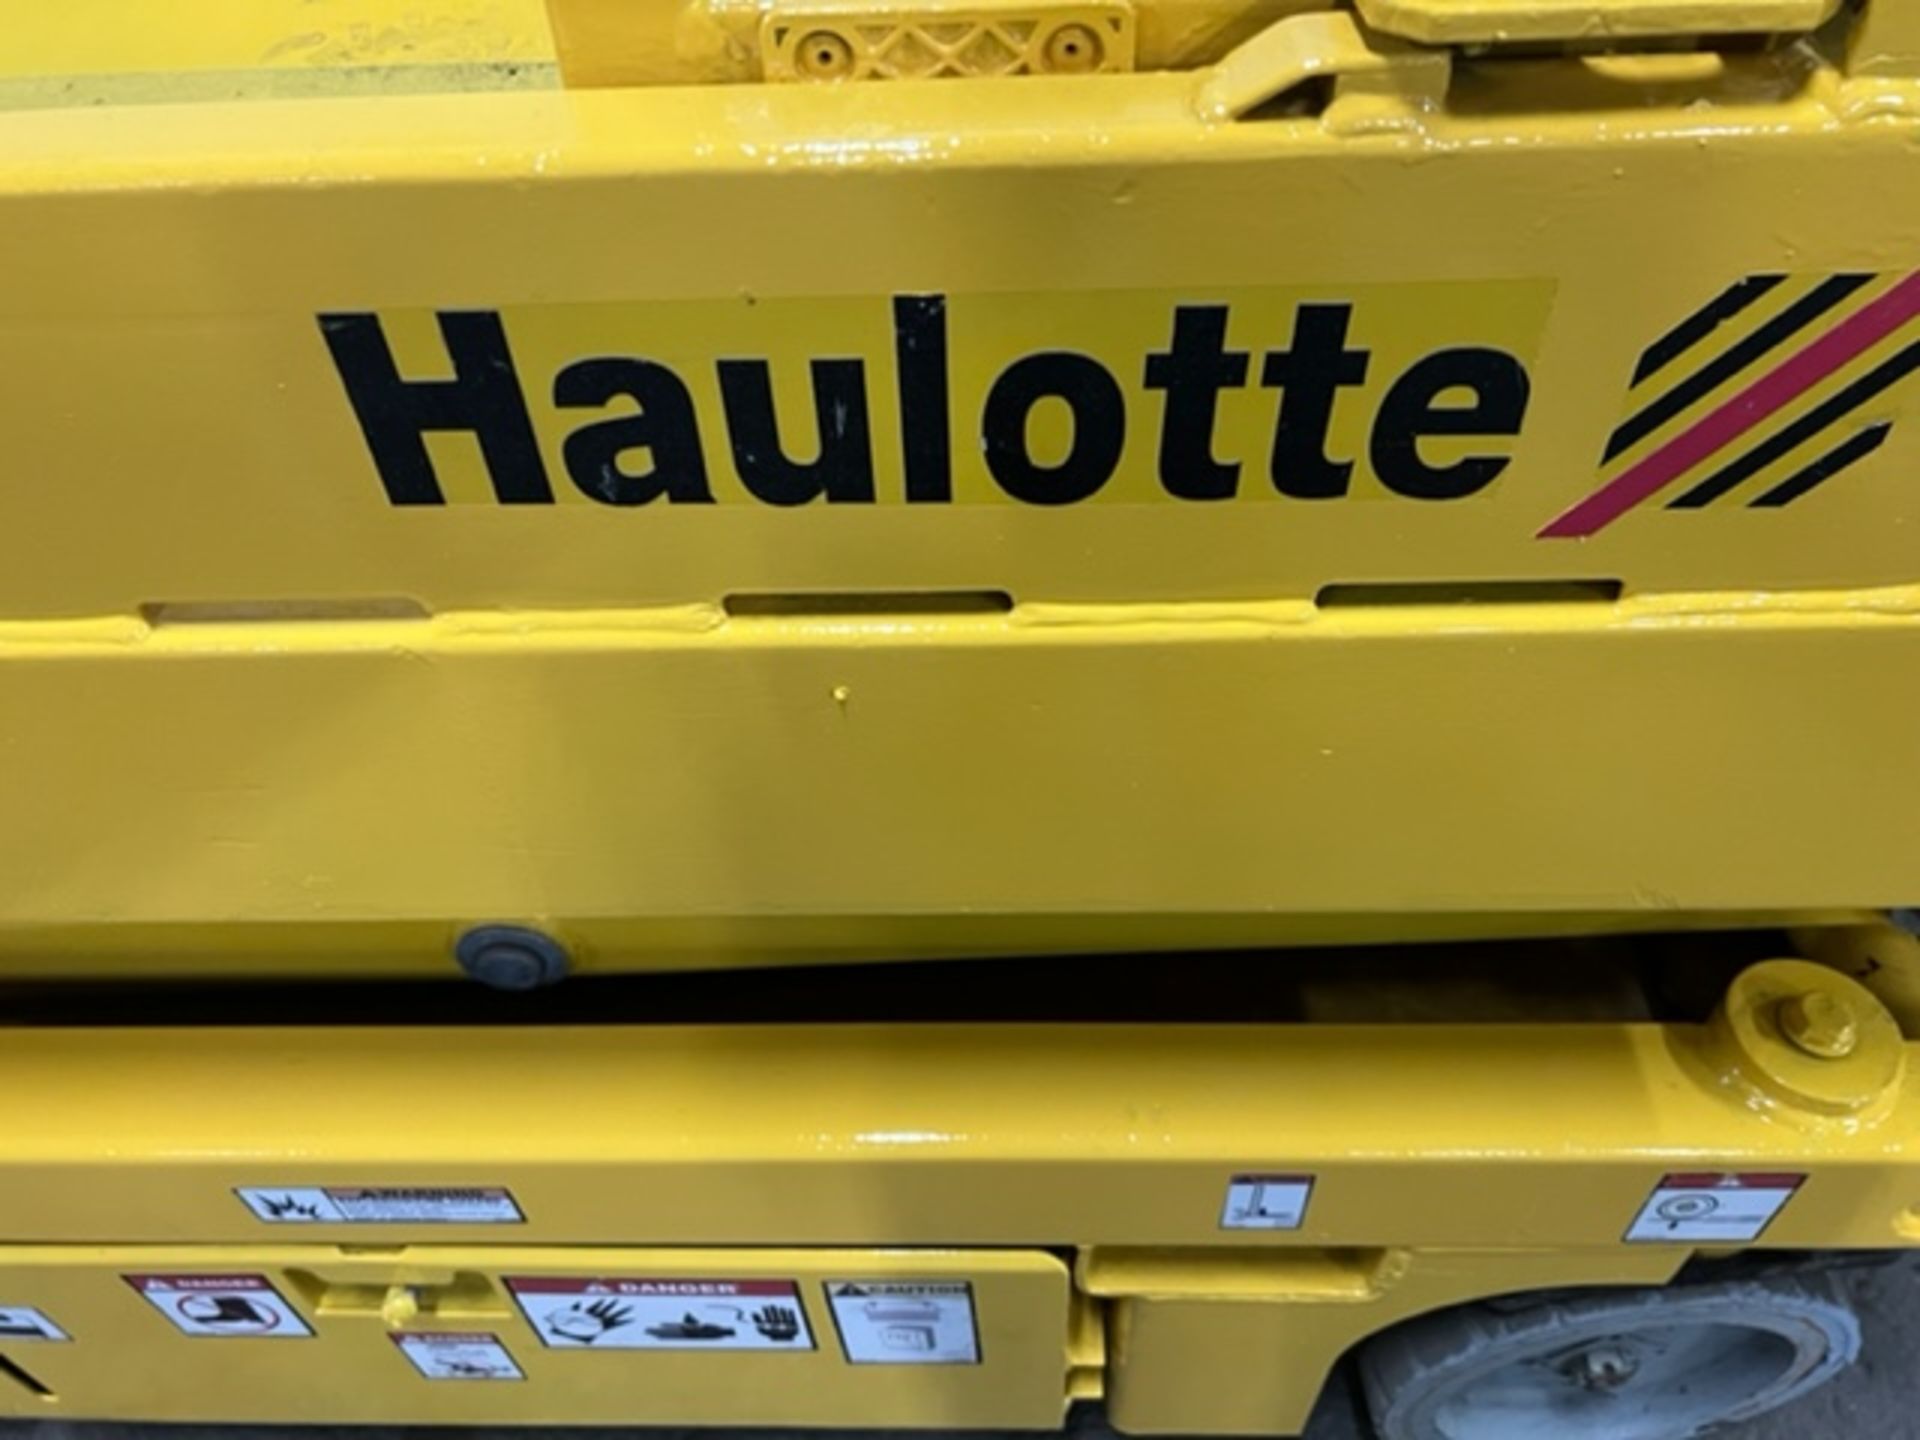 2015 Haulotte 1930E Electric Scissor Lift 500lbs Capacity with 19' platform height 24V unit with - Image 2 of 4